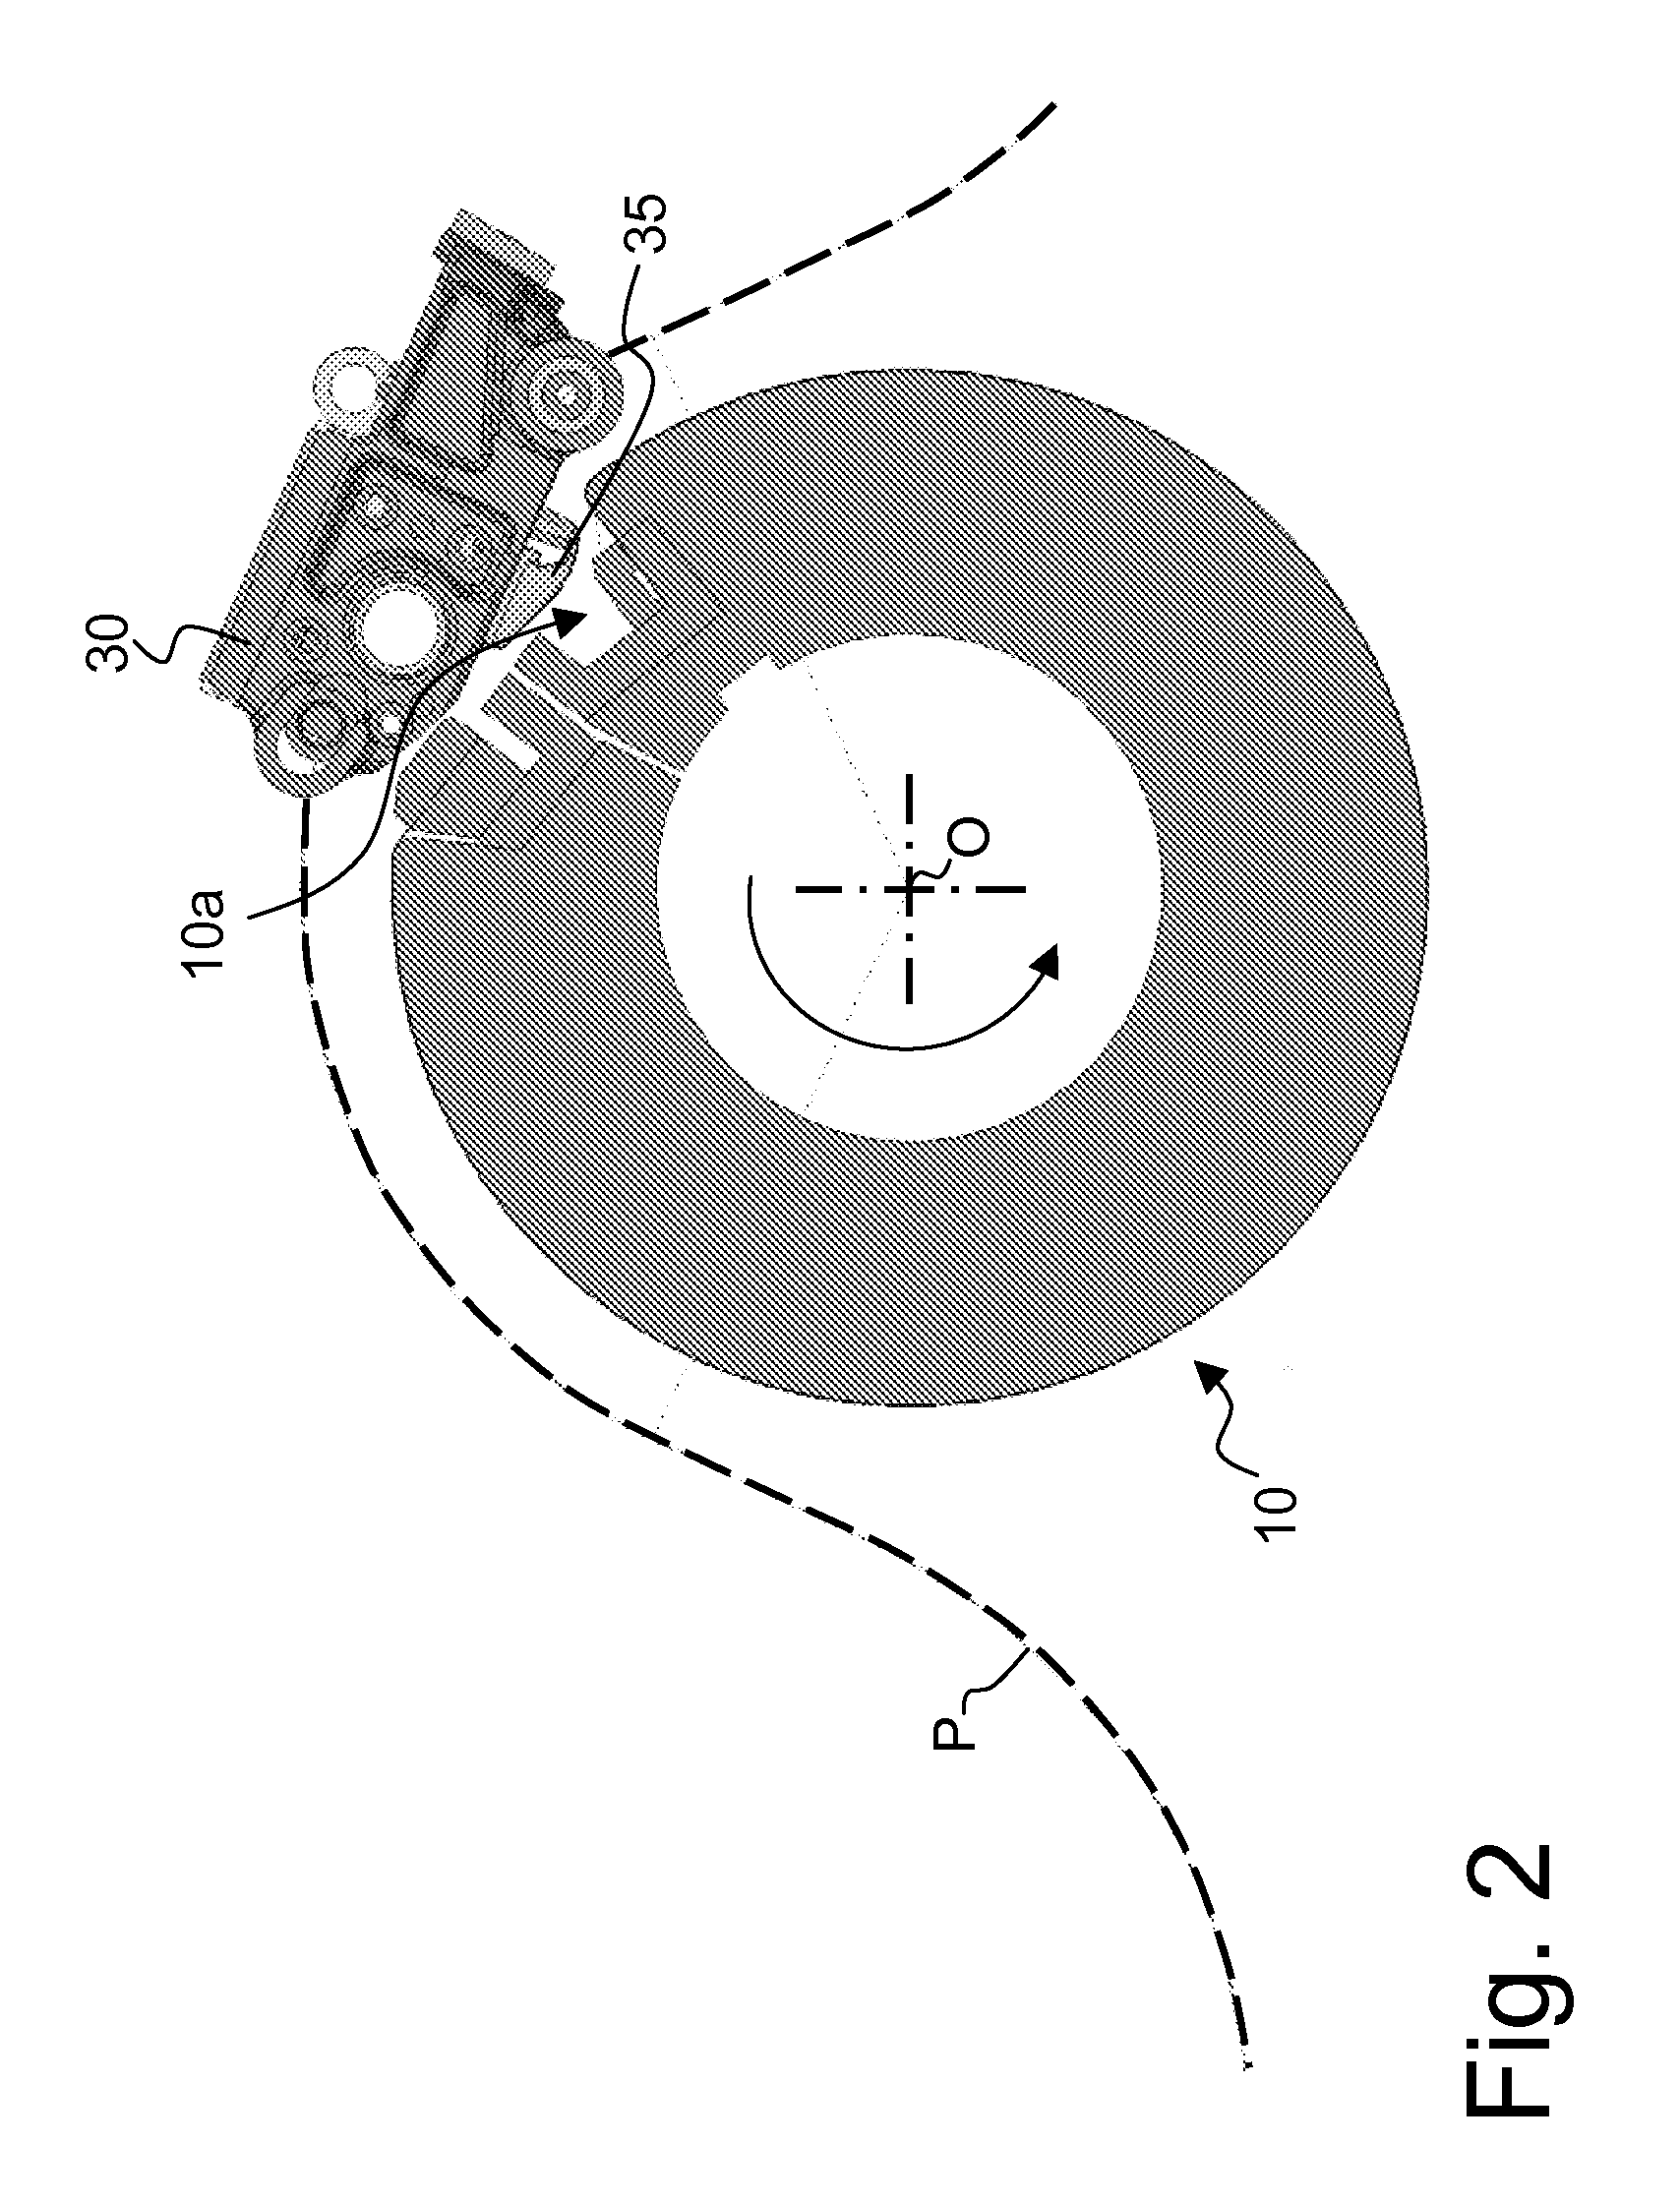 Cylinder Body for Orienting Magnetic Flakes Contained in an Ink or Varnish Vehicle Applied on a Sheet-Like or Web-Like Substrate